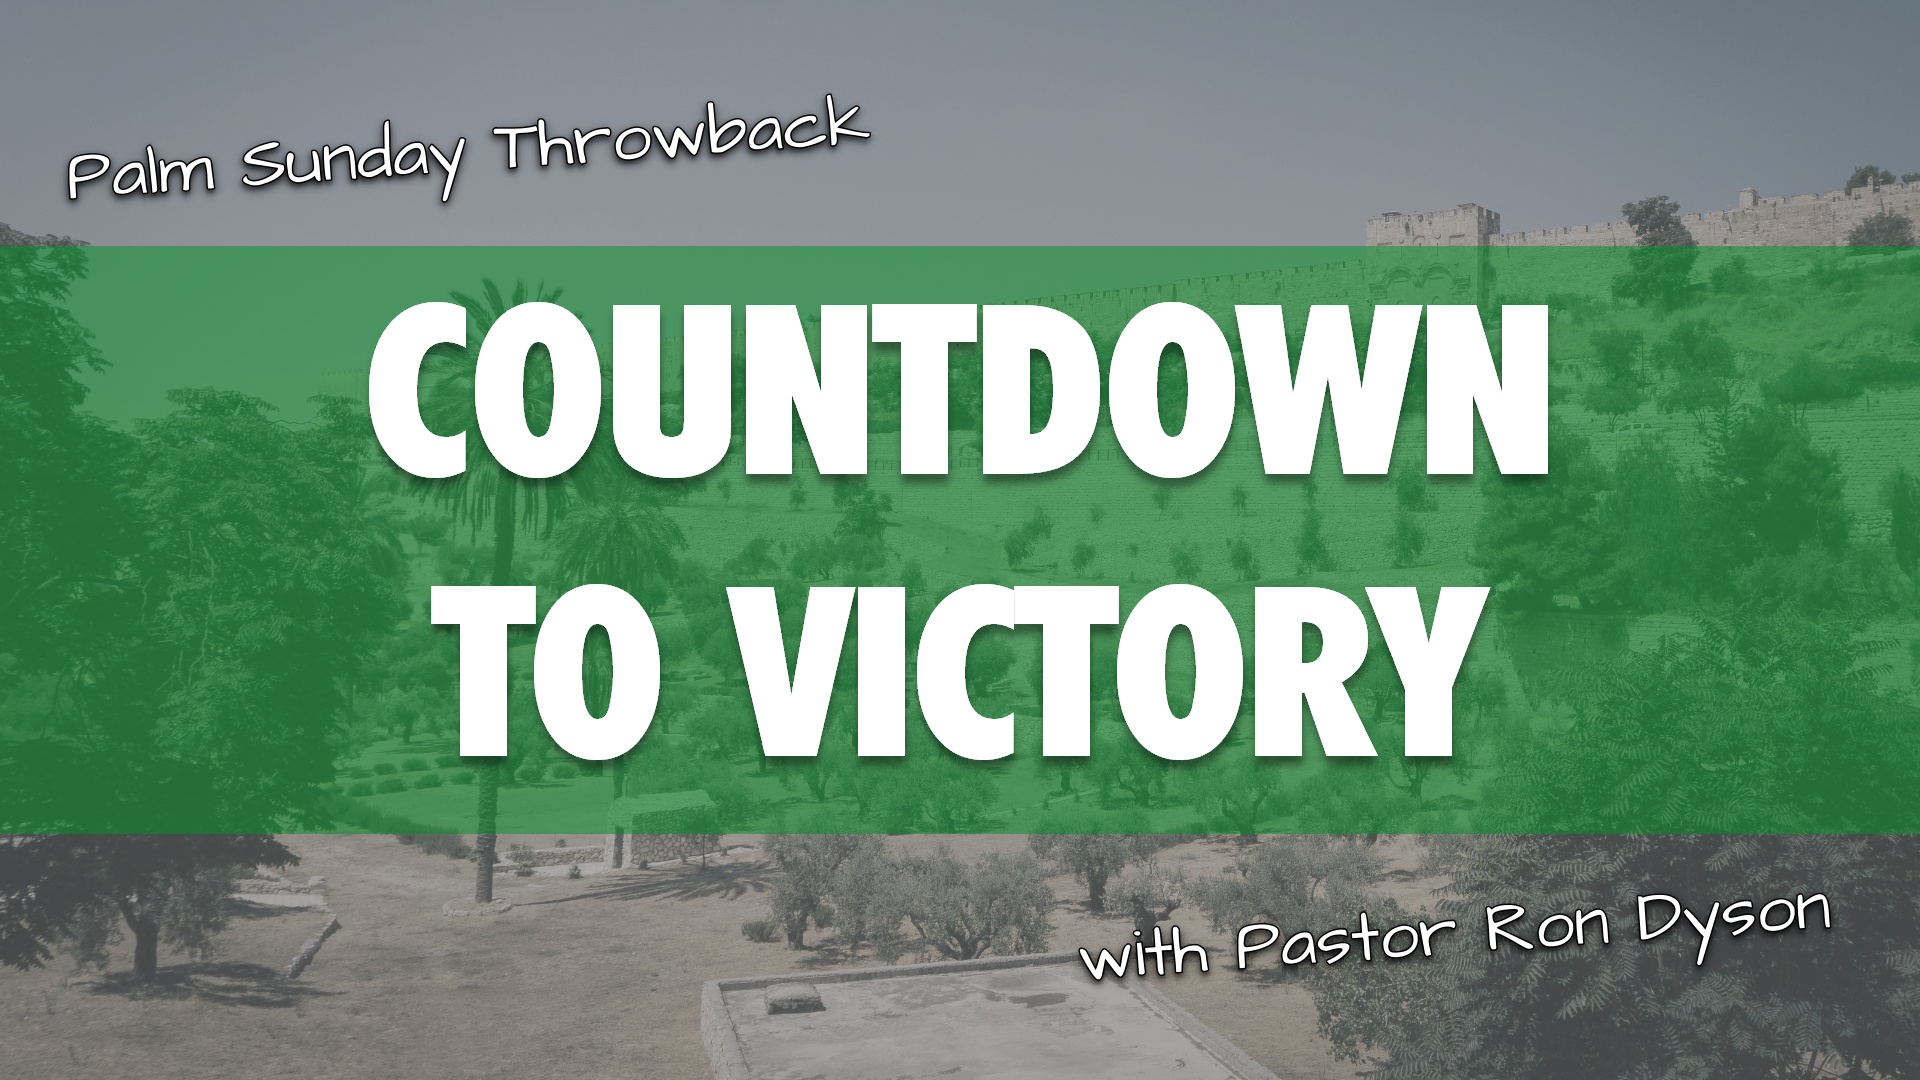 Countdown to Victory (Palm Sunday Throwback)